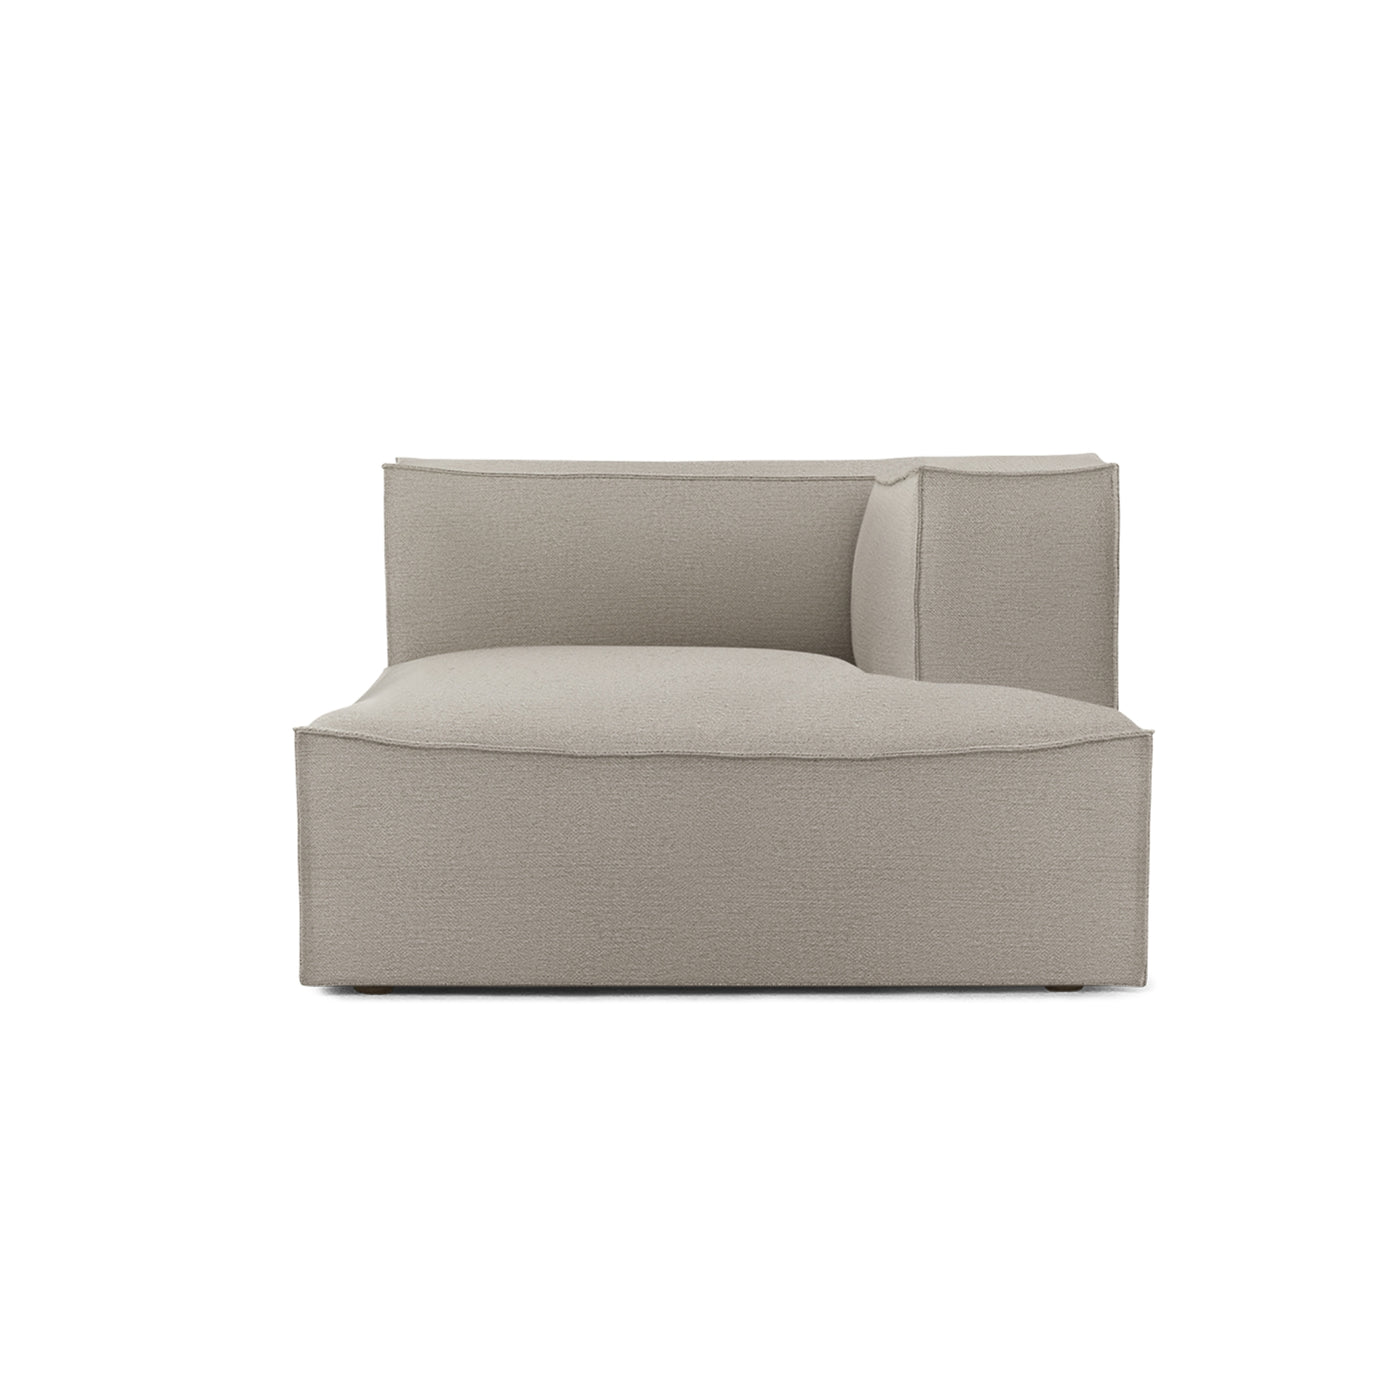 ferm LIVING Catena modualr sofa in cotton linen. Made to order from someday designs. 